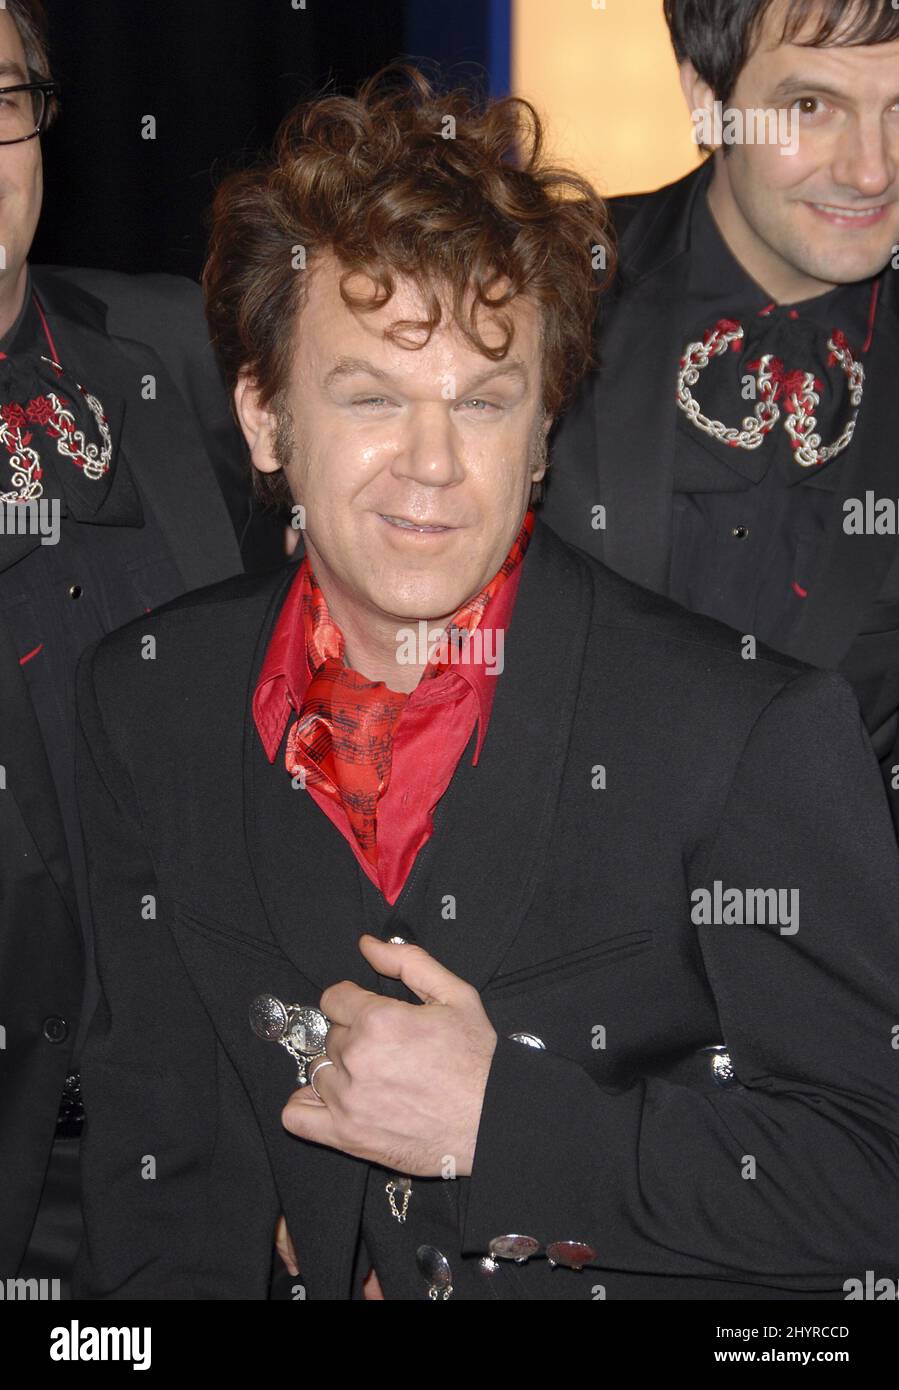 John C. Reilly attends the Walk Hard: The Dewey Cox Story Premiere at the Grauman's Chinese Theatre, Los Angeles Stock Photo